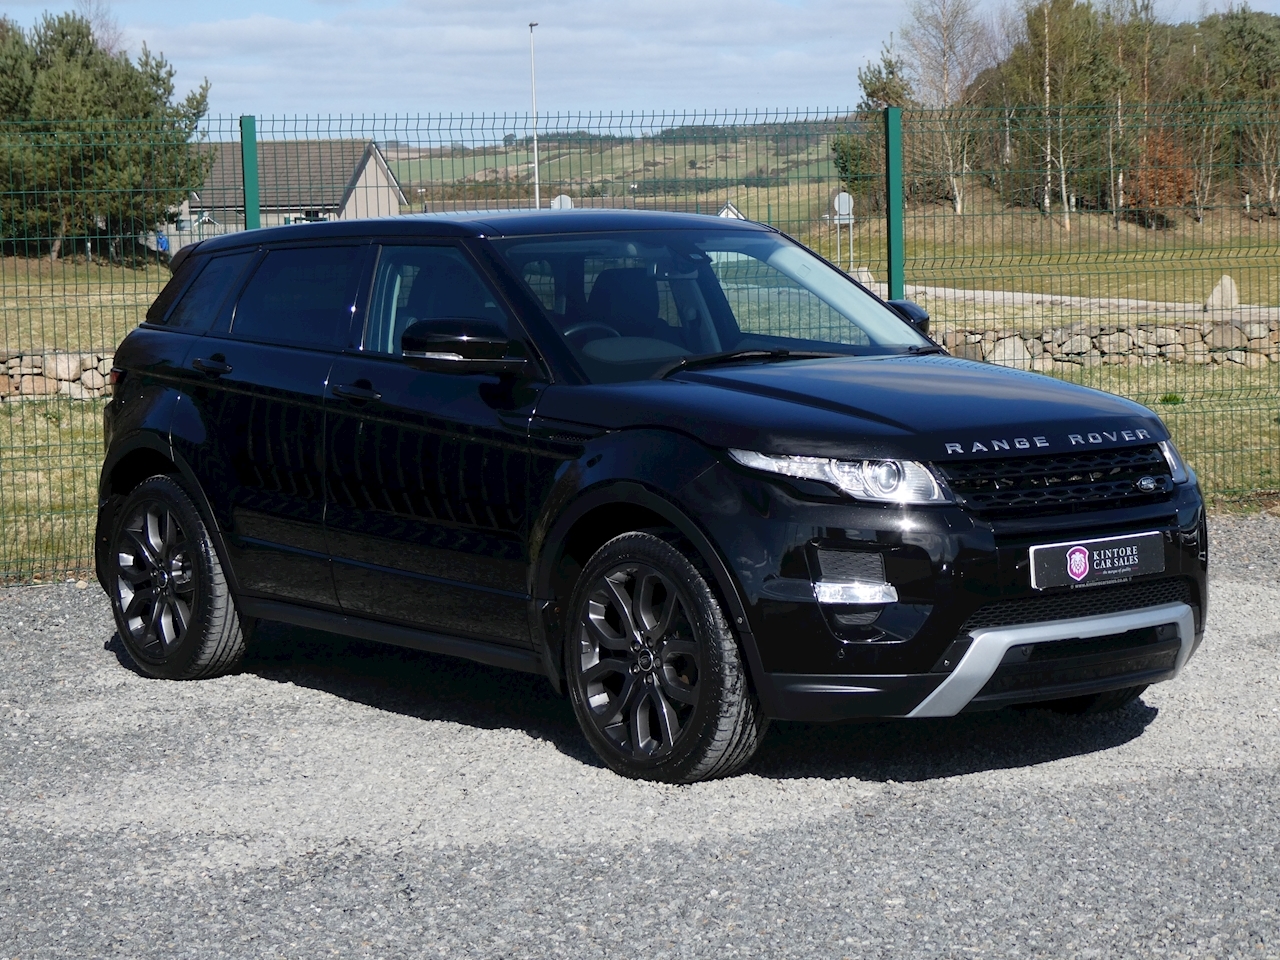 Range Rover Evoque 2.2 SD4 Dynamic Lux 2.2 5dr SUV Automatic Diesel